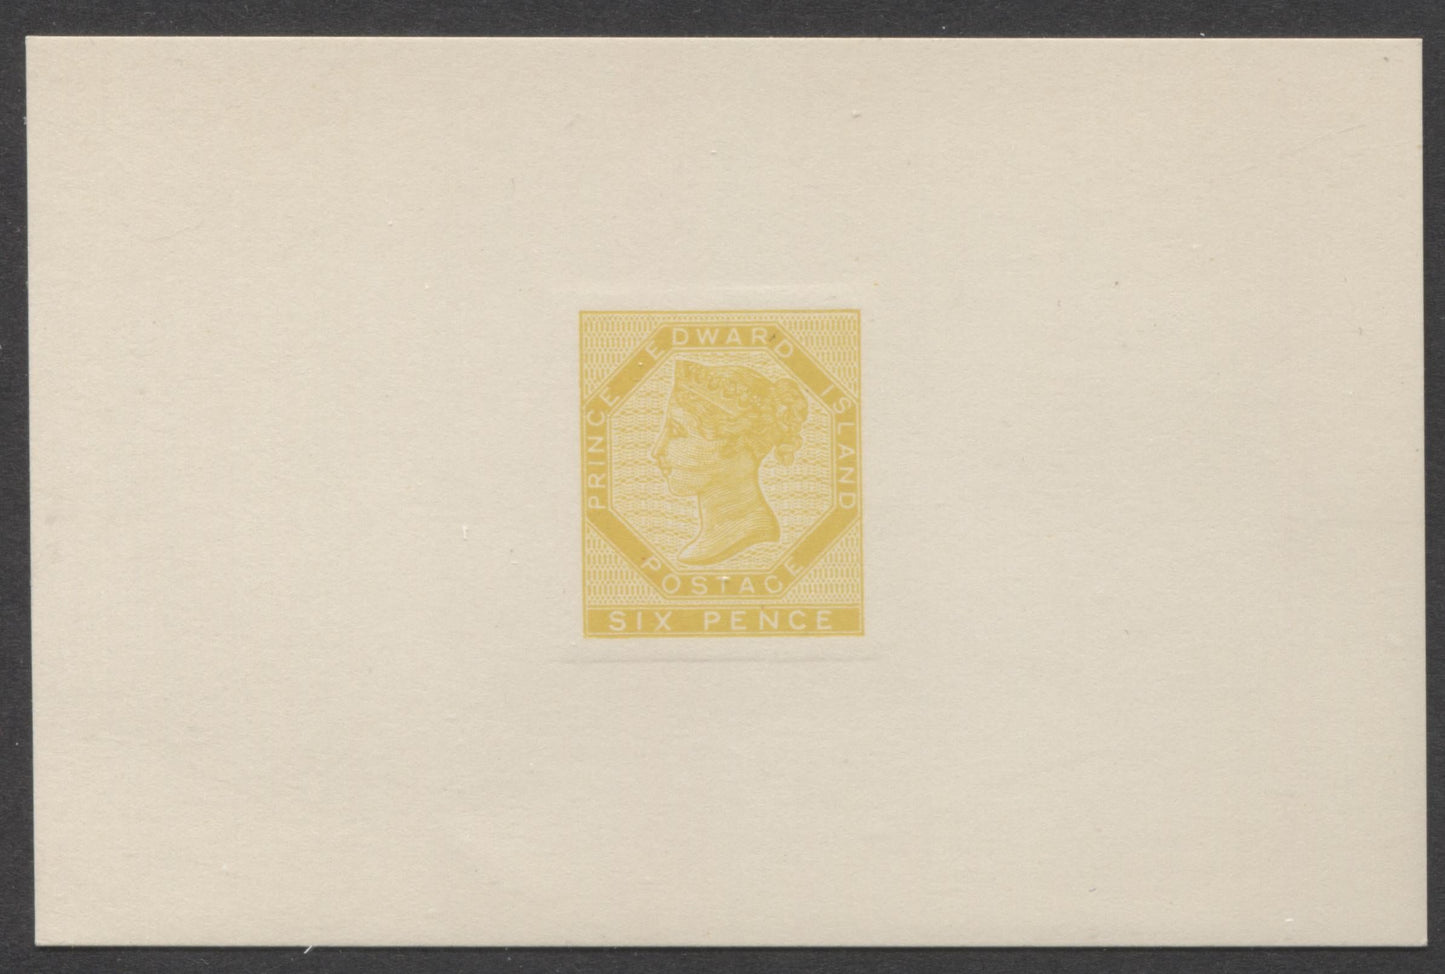 Lot 100 PEI #7R 6d Yellow Queen Victoria, 1944 Red Cross Reprint, A Very Fine Die Proof